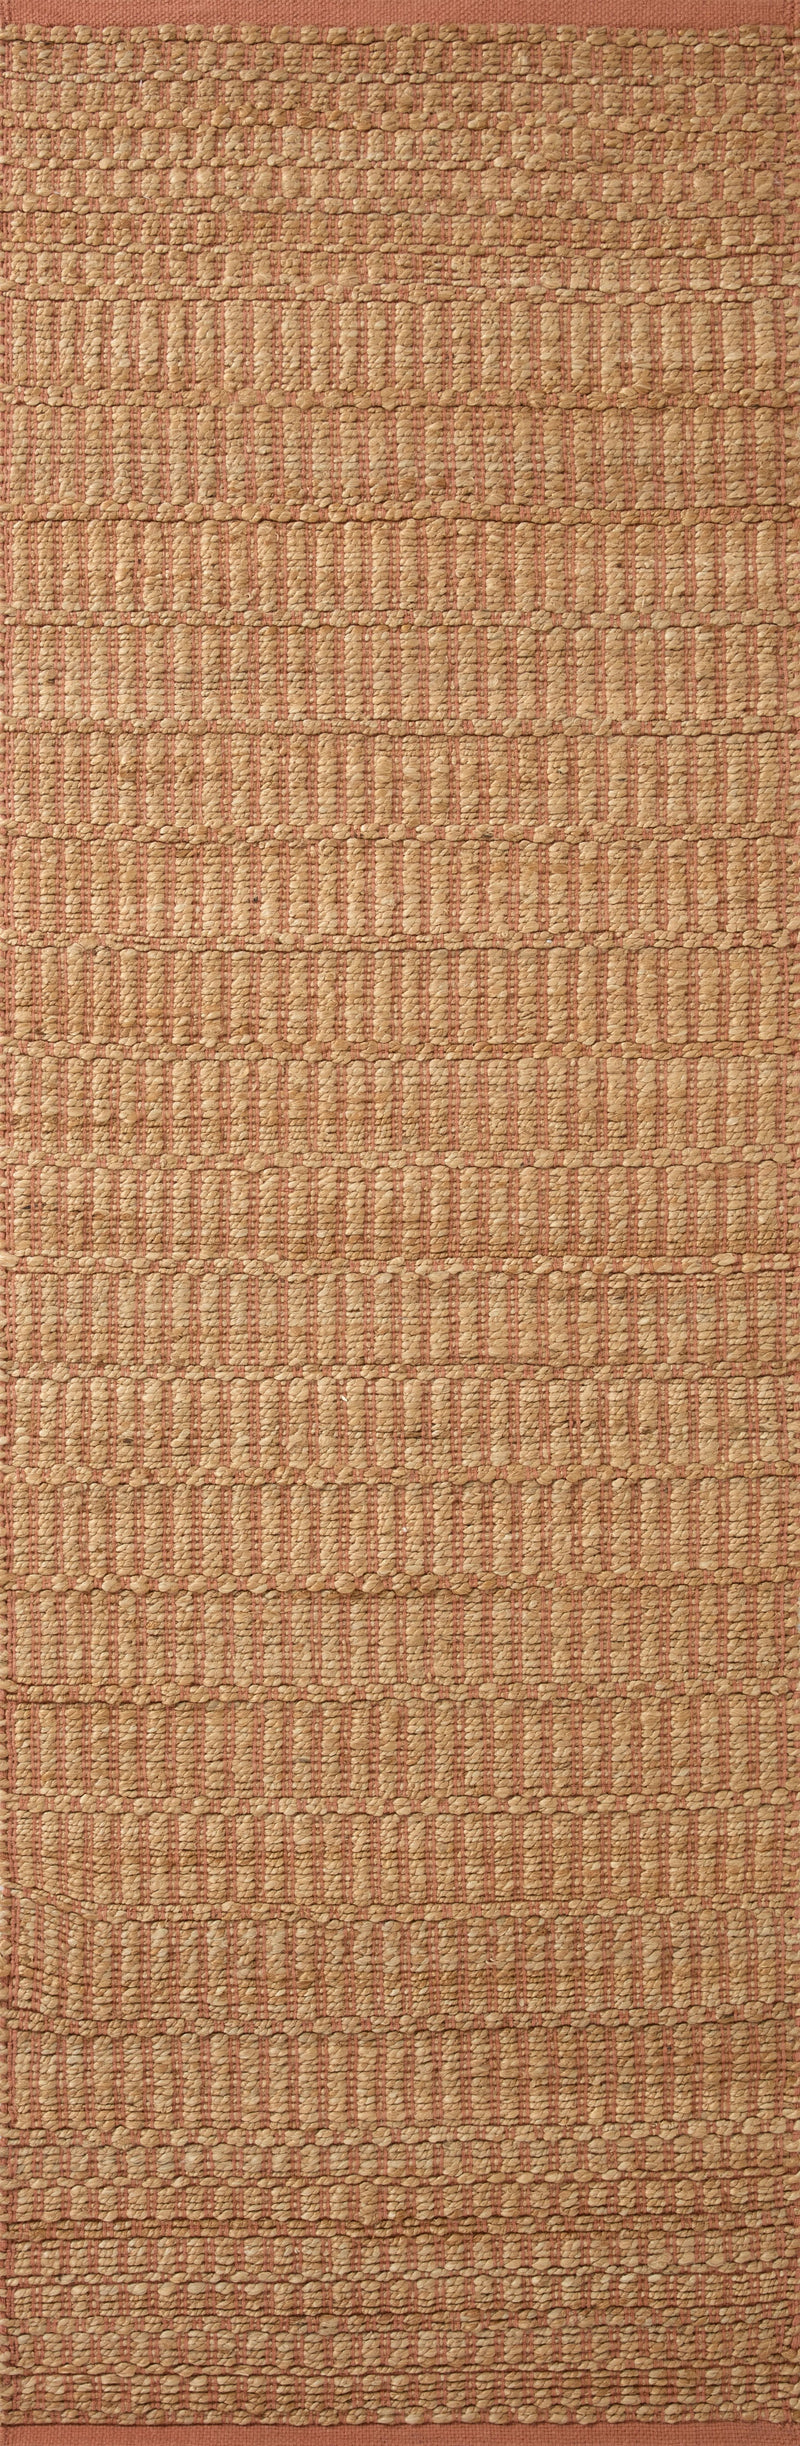 media image for colton hand woven natural clay rug by angela rose x loloi colocon 05nacg2030 2 273